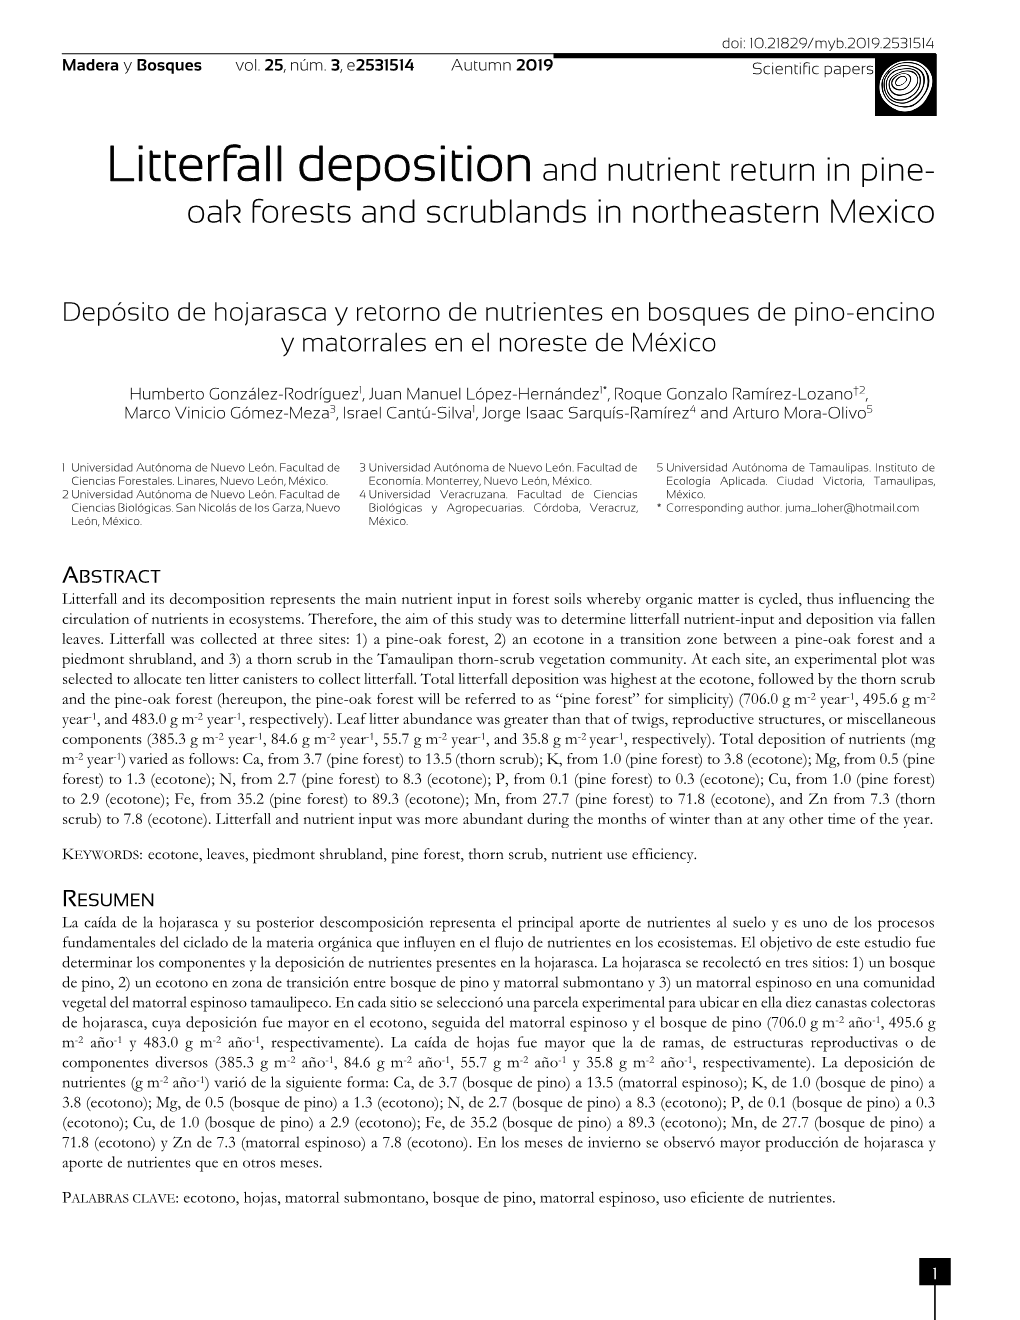 Litterfall Deposition and Nutrient Return in Pine-Oak Forests and Scrublands in D.F: Fondo De Cultura Económica